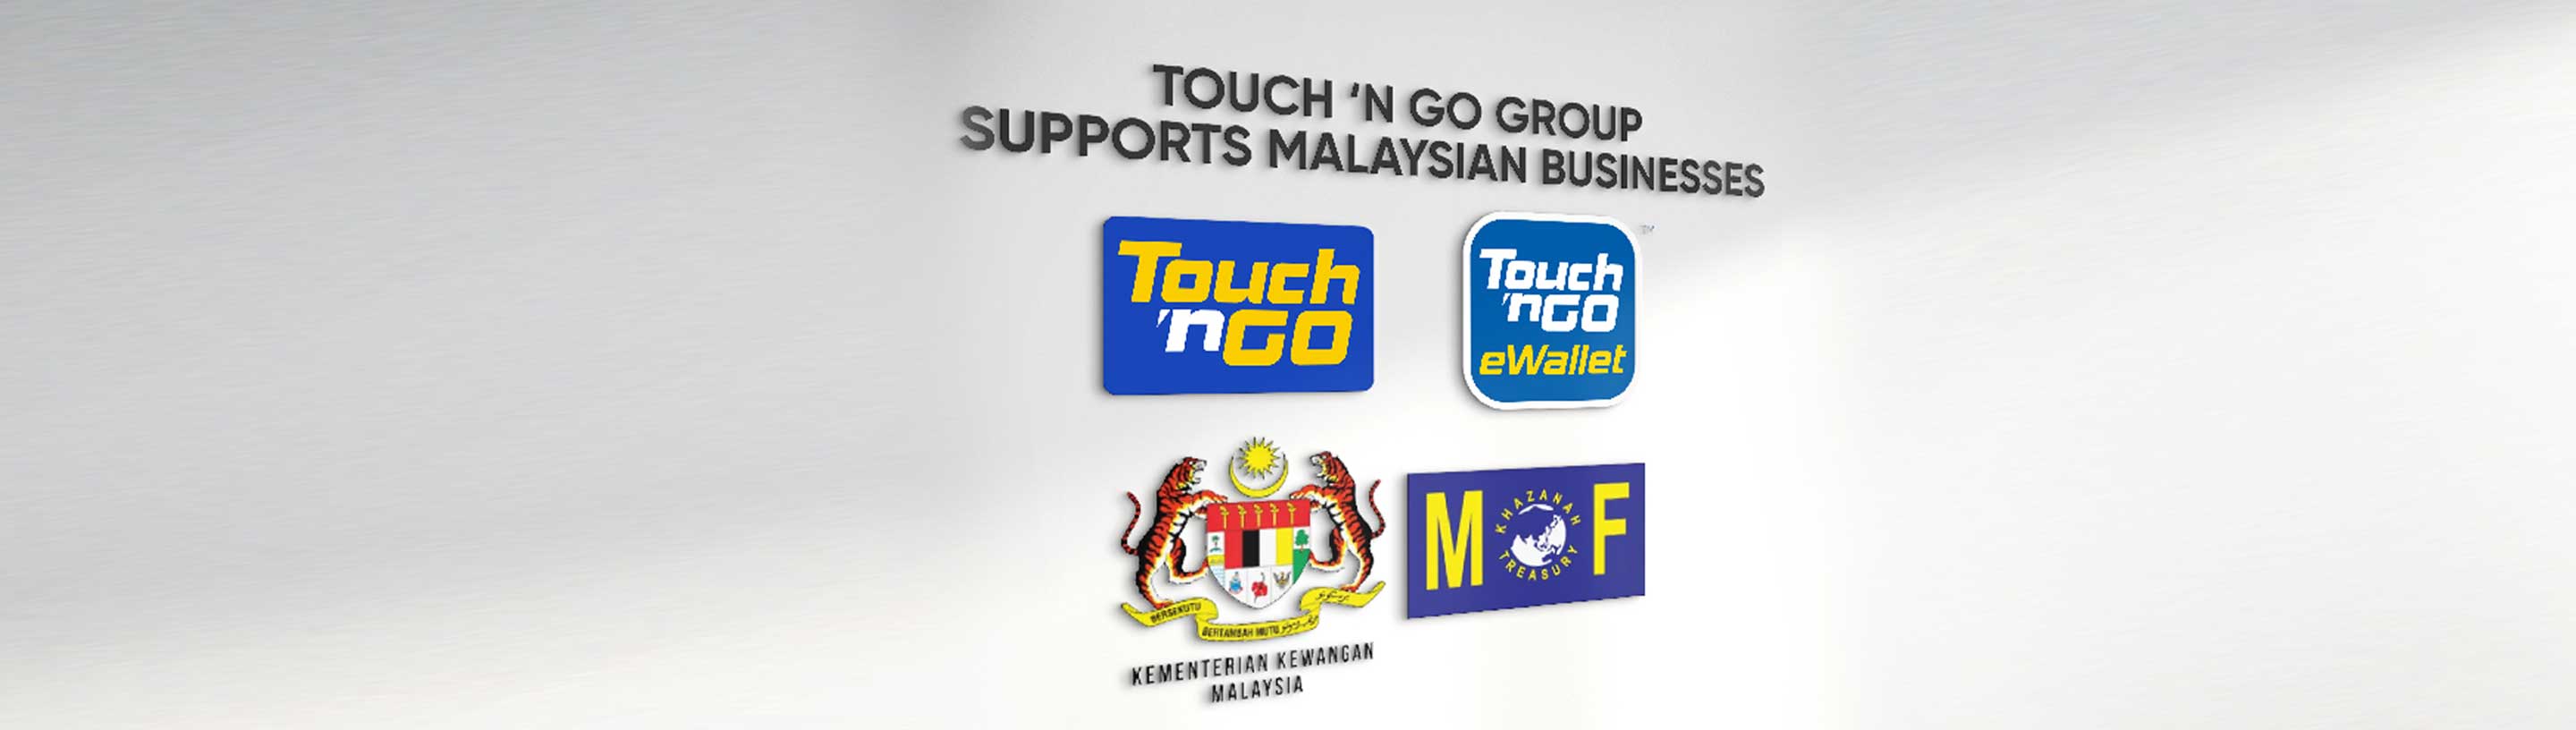 Touch ‘n Go Group supports Malaysian businesses